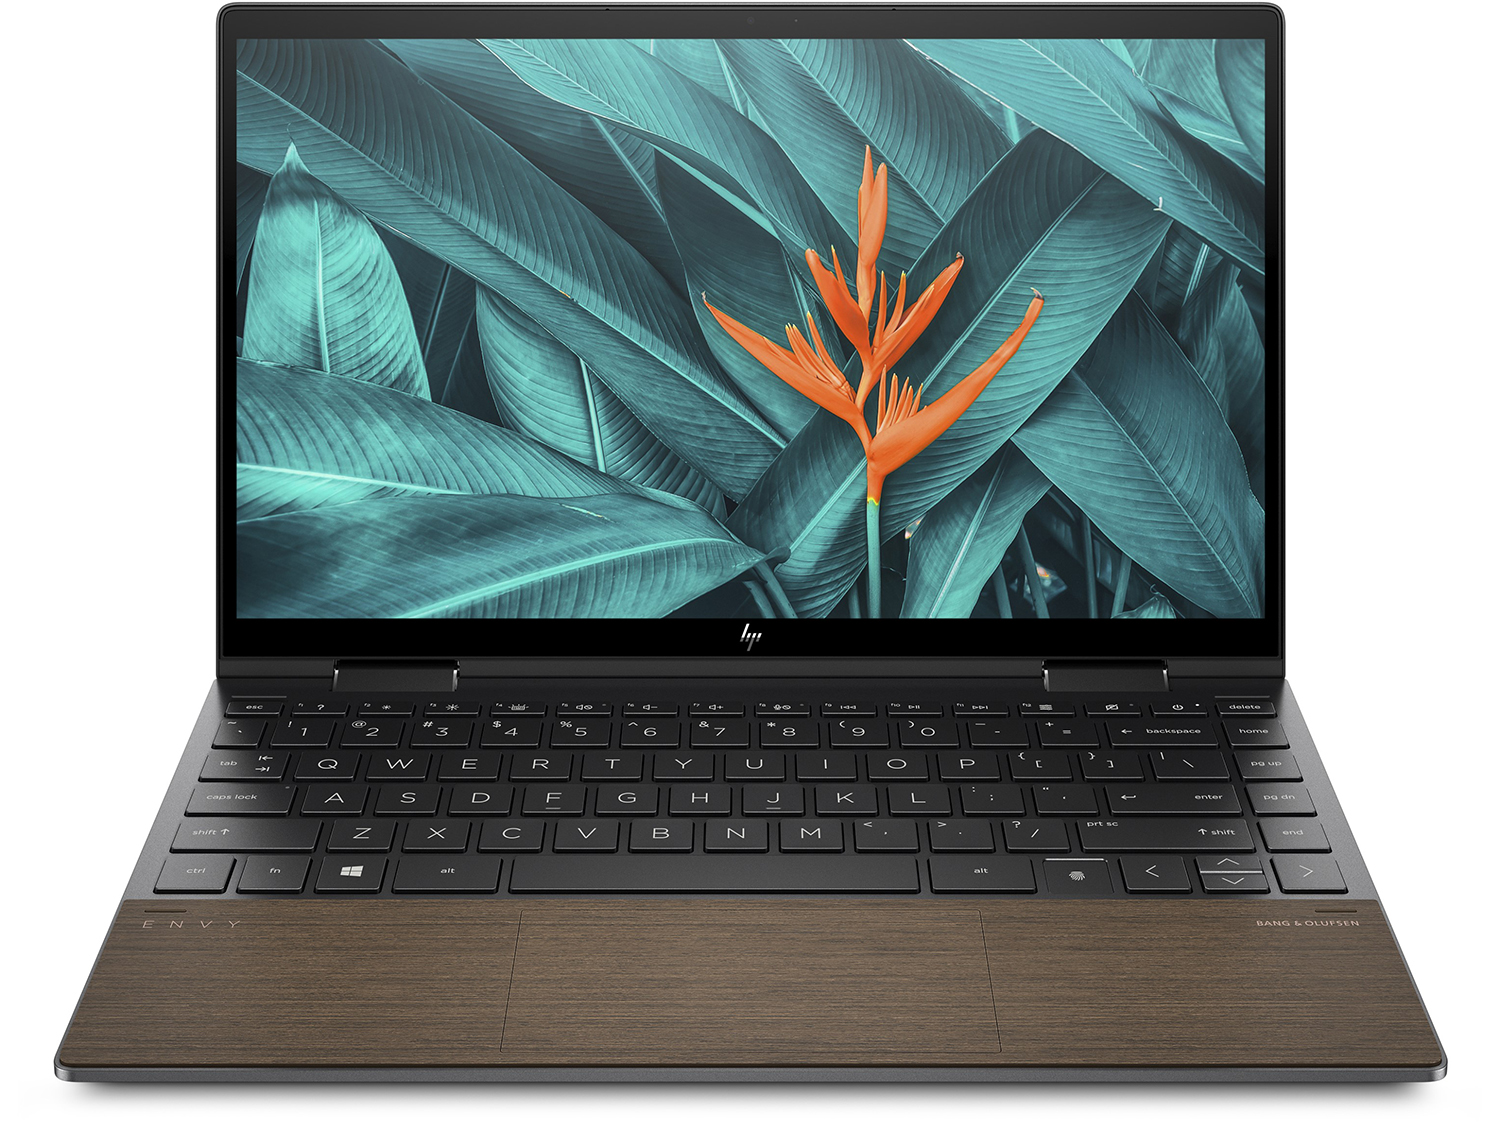 HP Envy x360 13 (13-ay0000) review - a great little machine for 